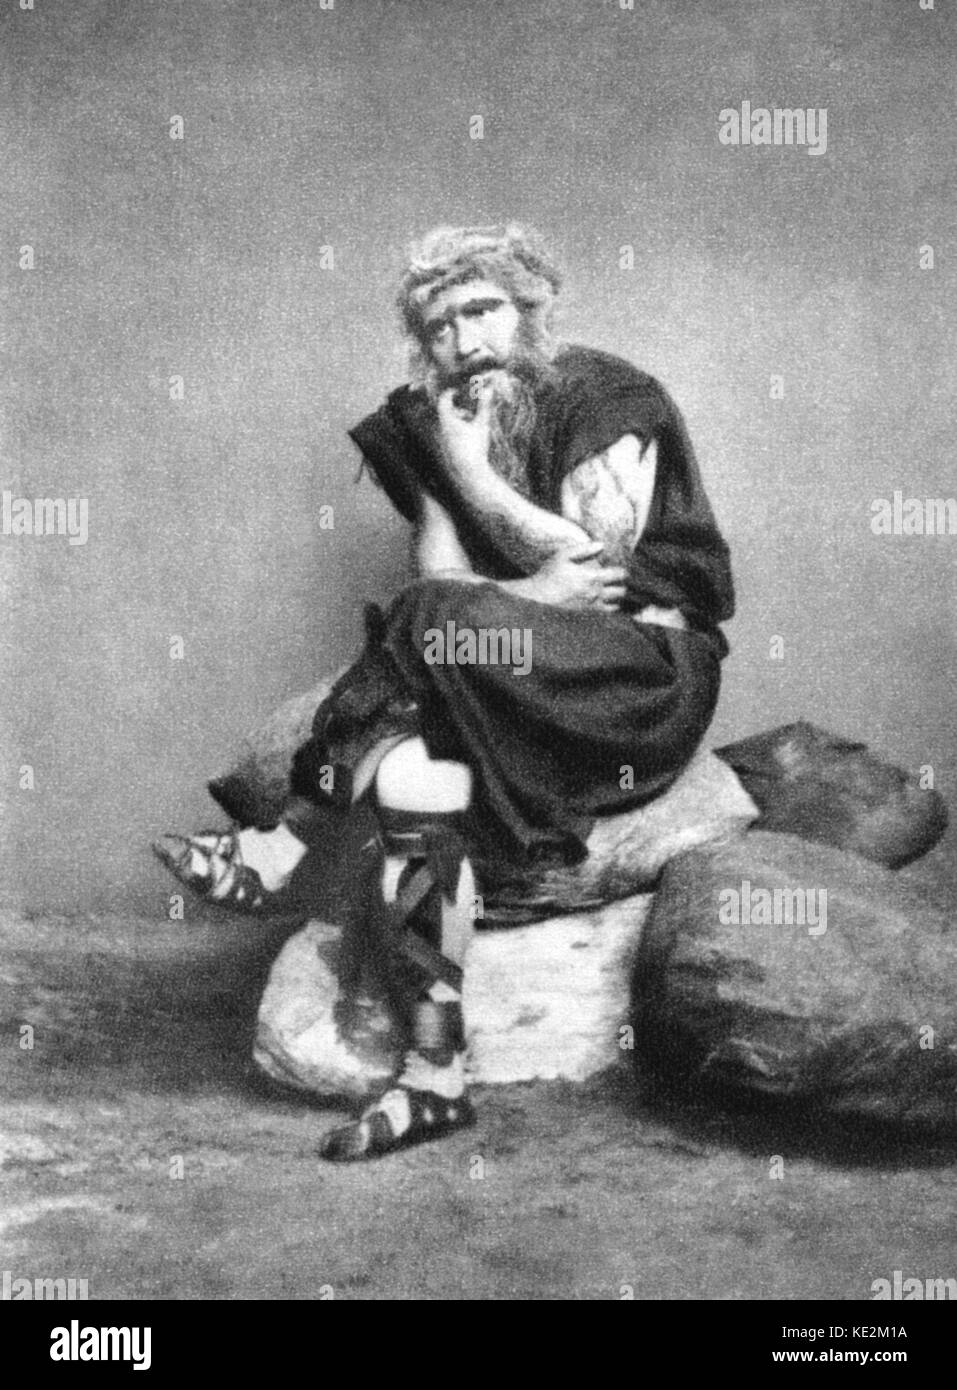 Max Schlosser as Mime in premiere of Richard Wagner's 'Ring Cycle' ('Der Ring des Nibelungen'). German tenor. MS: 17 October 1835 - 2 September 1916. Stock Photo